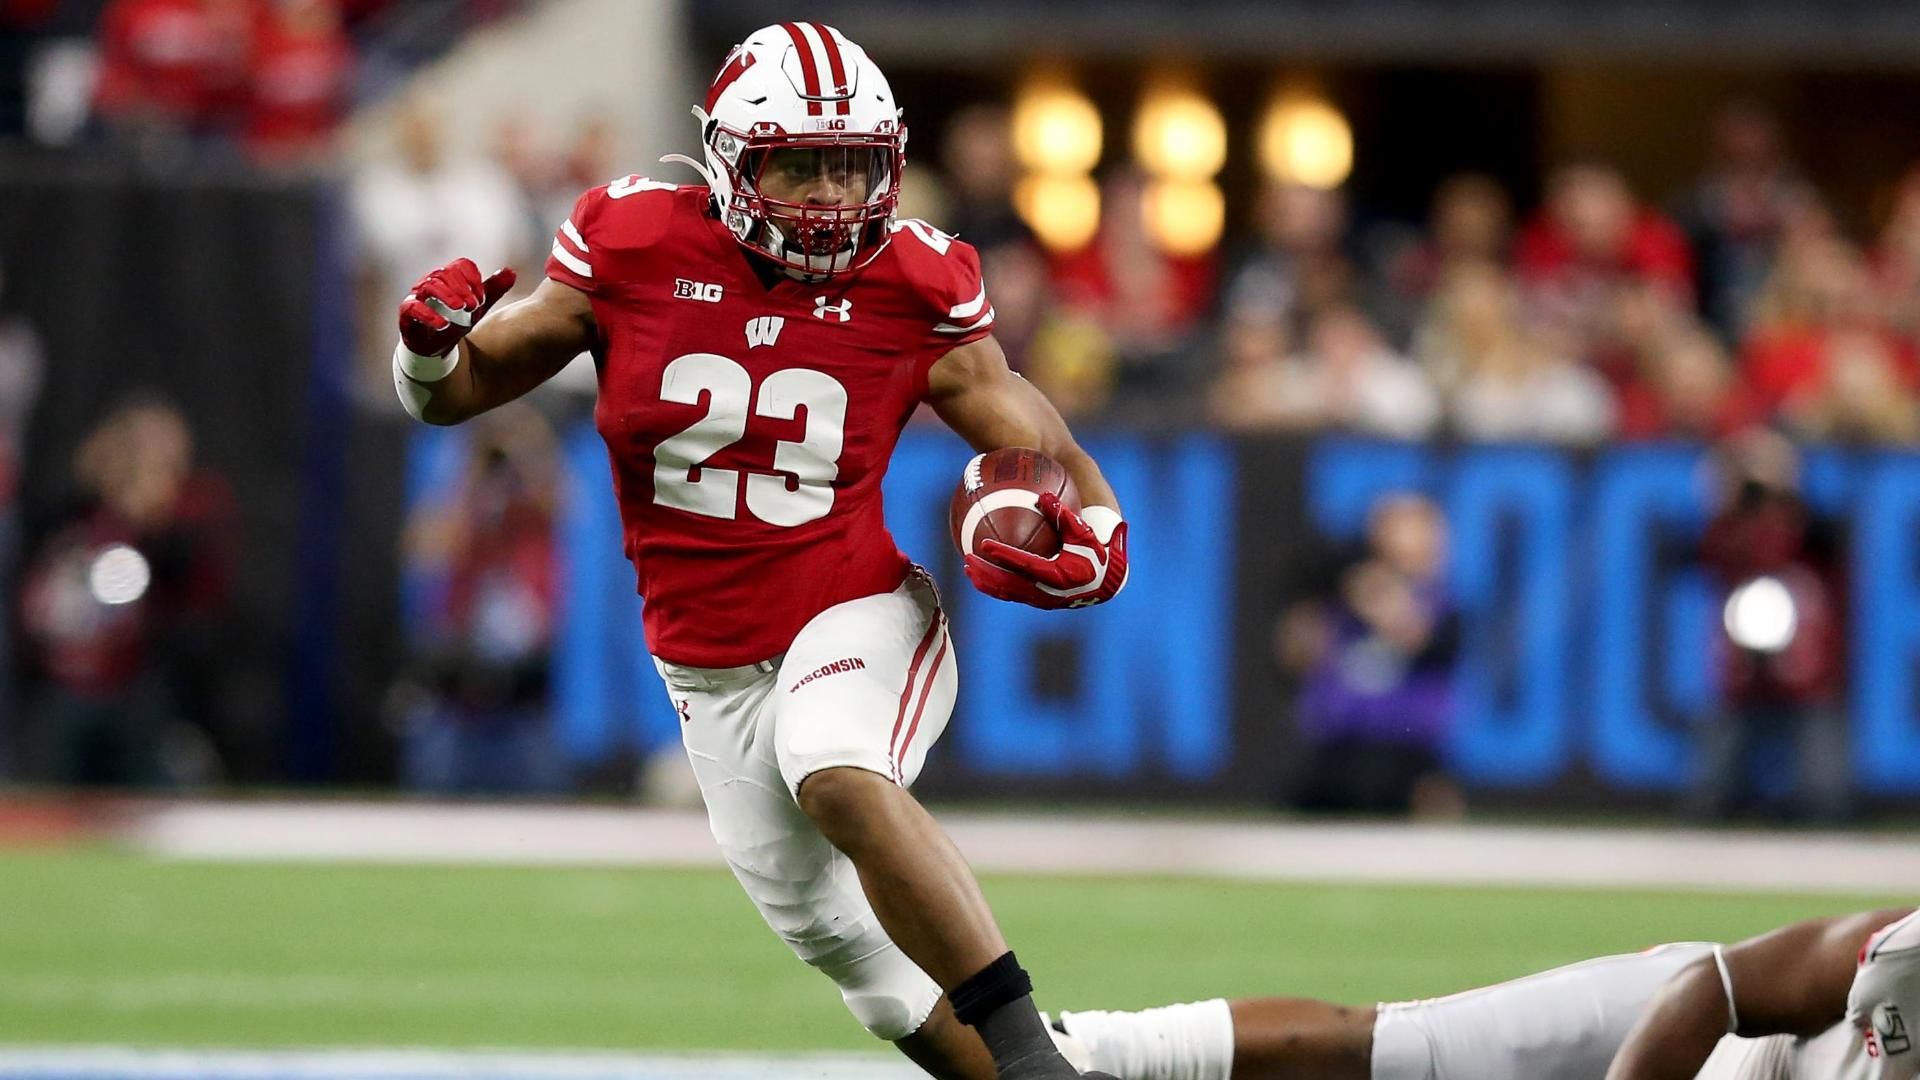 Wisconsin's record-breaking running back Jonathan Taylor is taken by t...